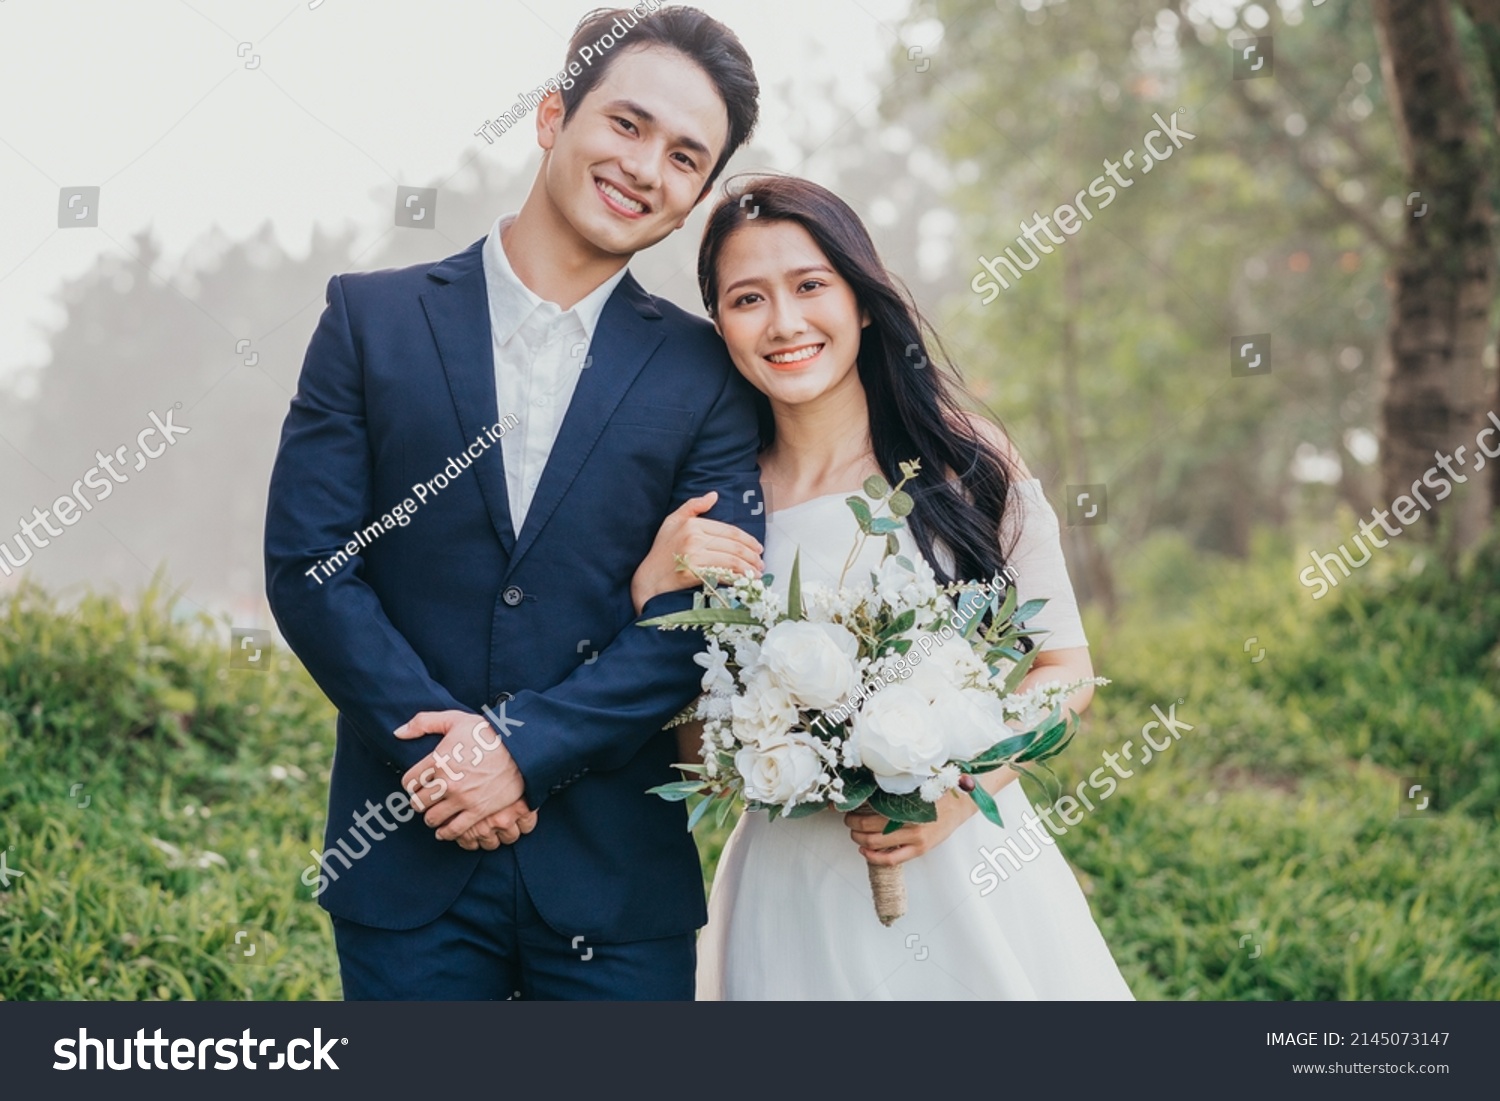 Image of young Asian bride and groom #2145073147